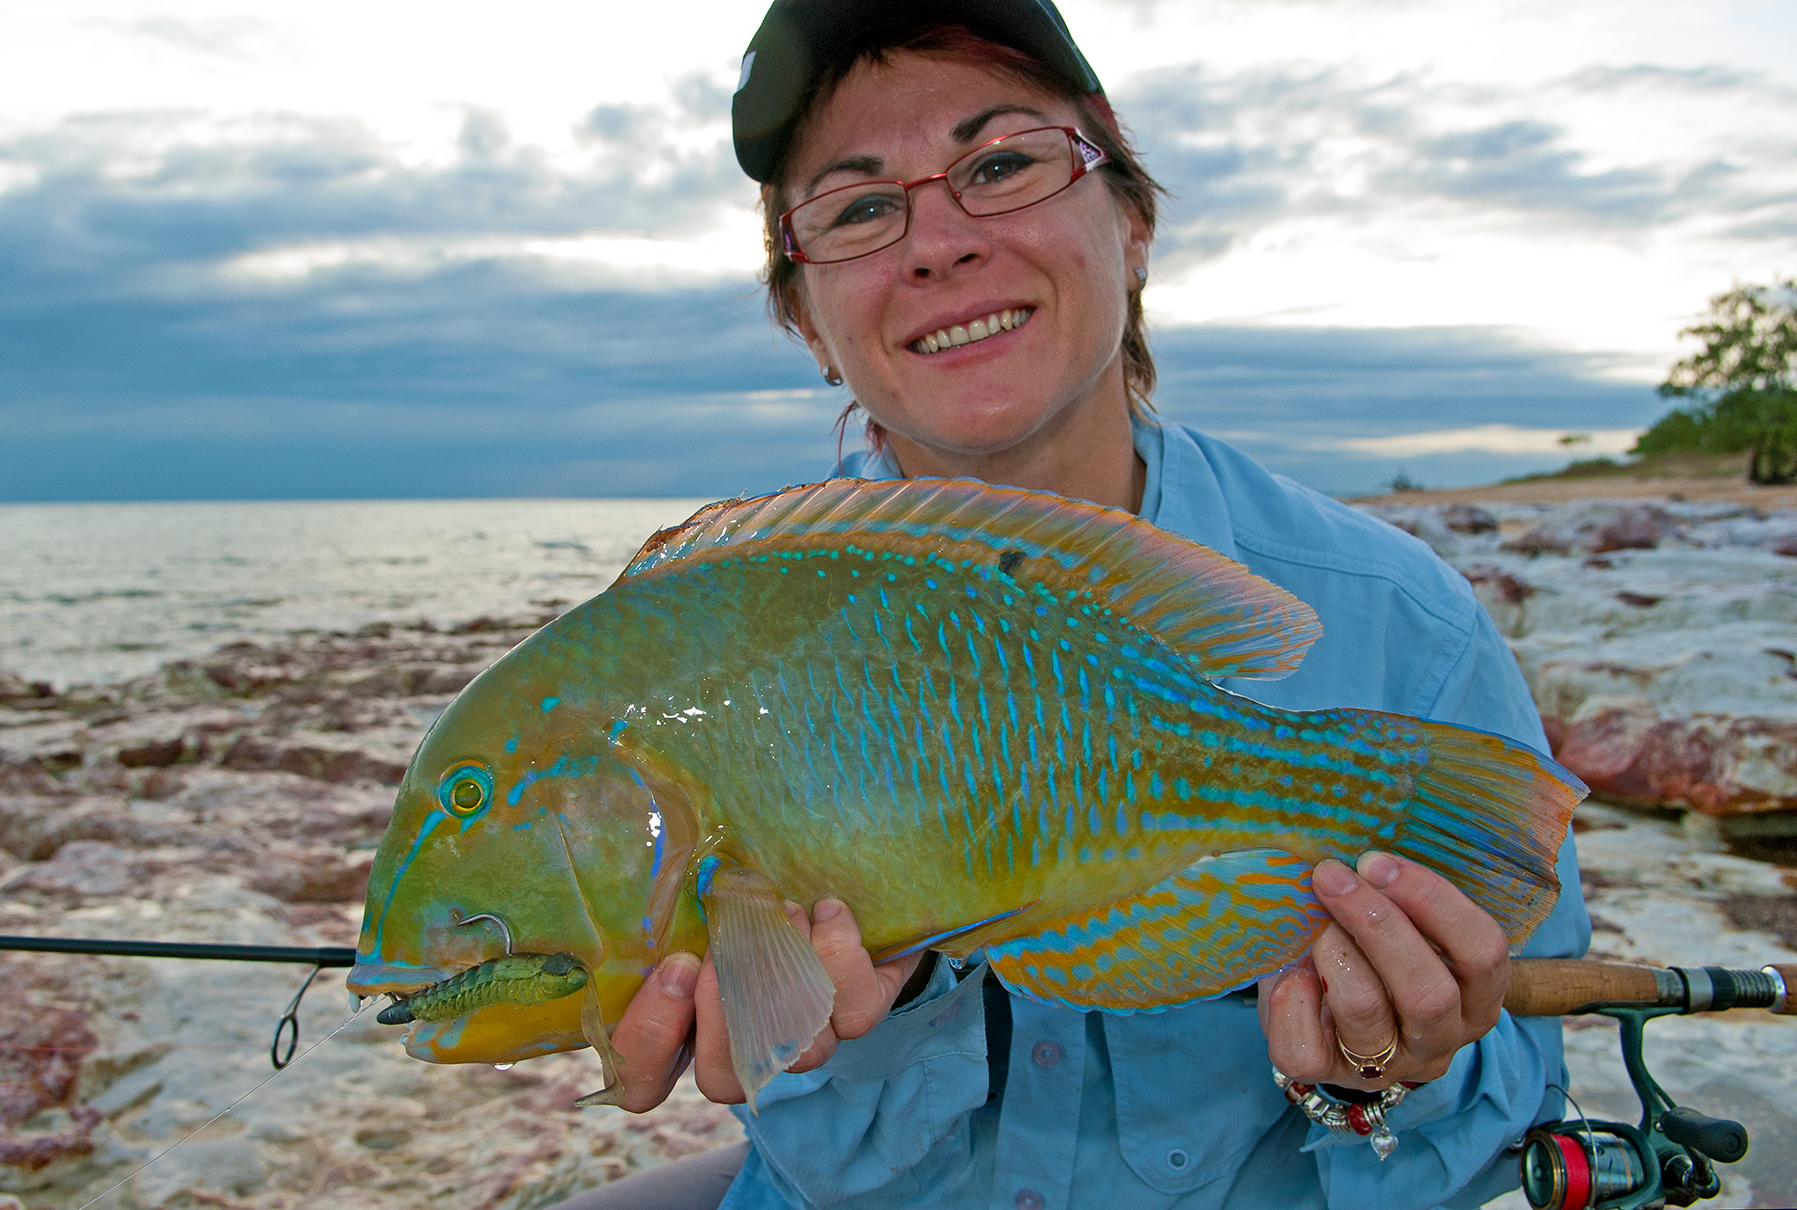 Jo with a beautiful black-spot tuskfish taken from the rocks at Wagait Beach, across the Harbour from Darwin.